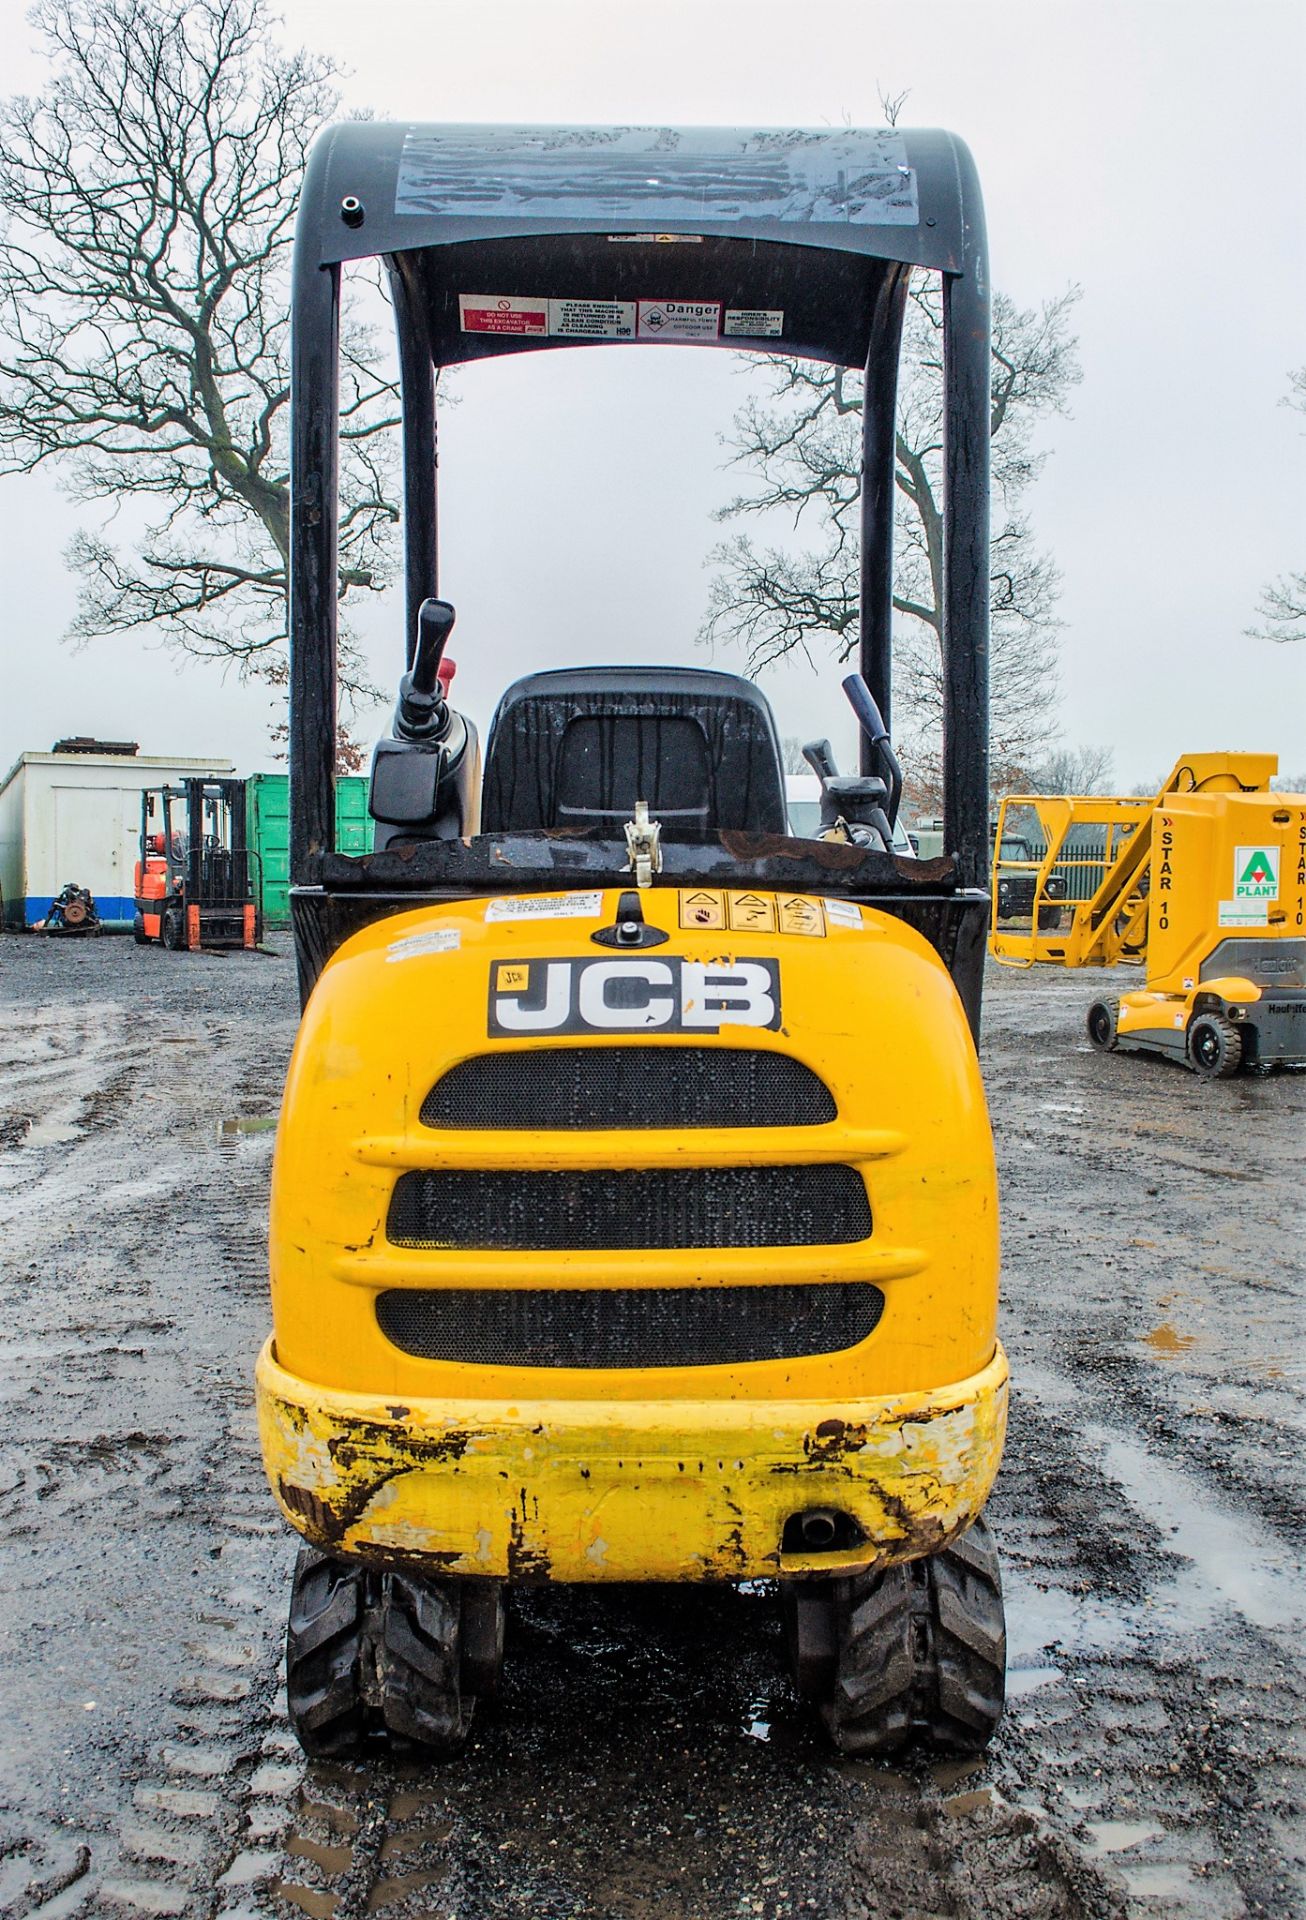 JCB 801.4 CTS1.5 tonne rubber tracked mini excavator Year: 2014 S/N: 2070484 Recorded Hours: 1398 - Image 6 of 18